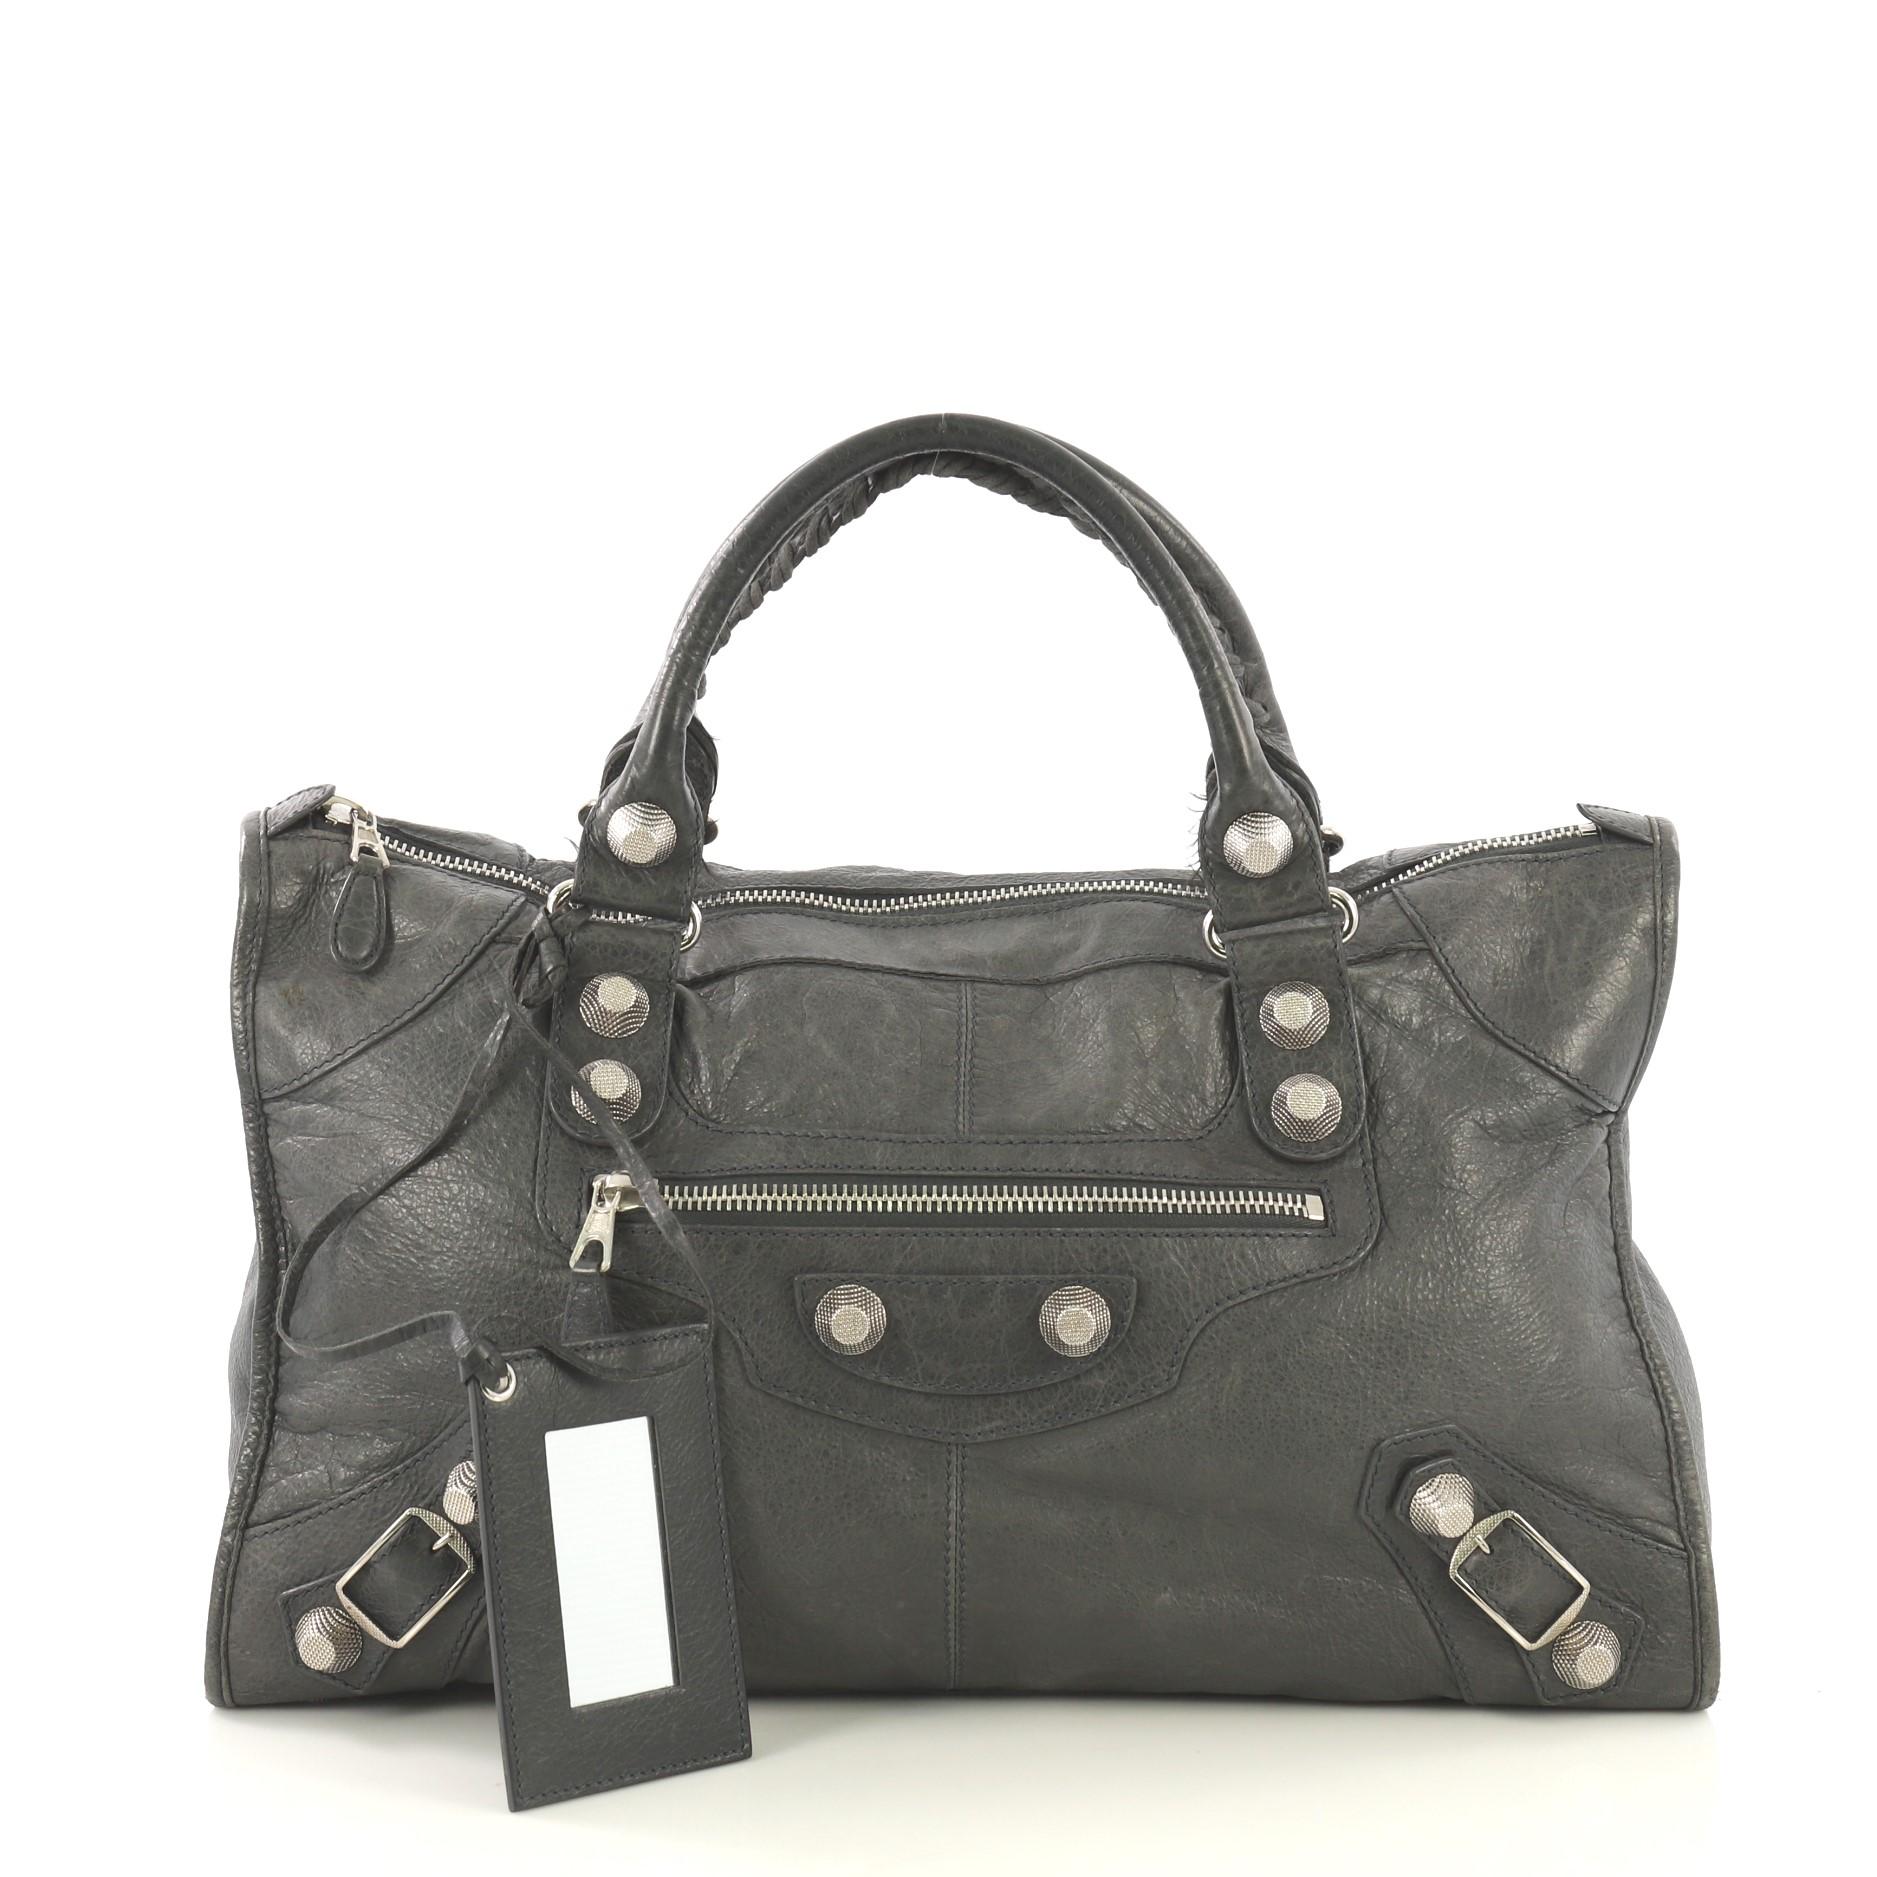 This Balenciaga Work Giant Studs Bag Leather, crafted from grey leather, features dual braided woven handles, exterior front zip pocket, stud detailing, and silver-tone hardware. Its top zip closure opens to a black fabric interior with side zip and